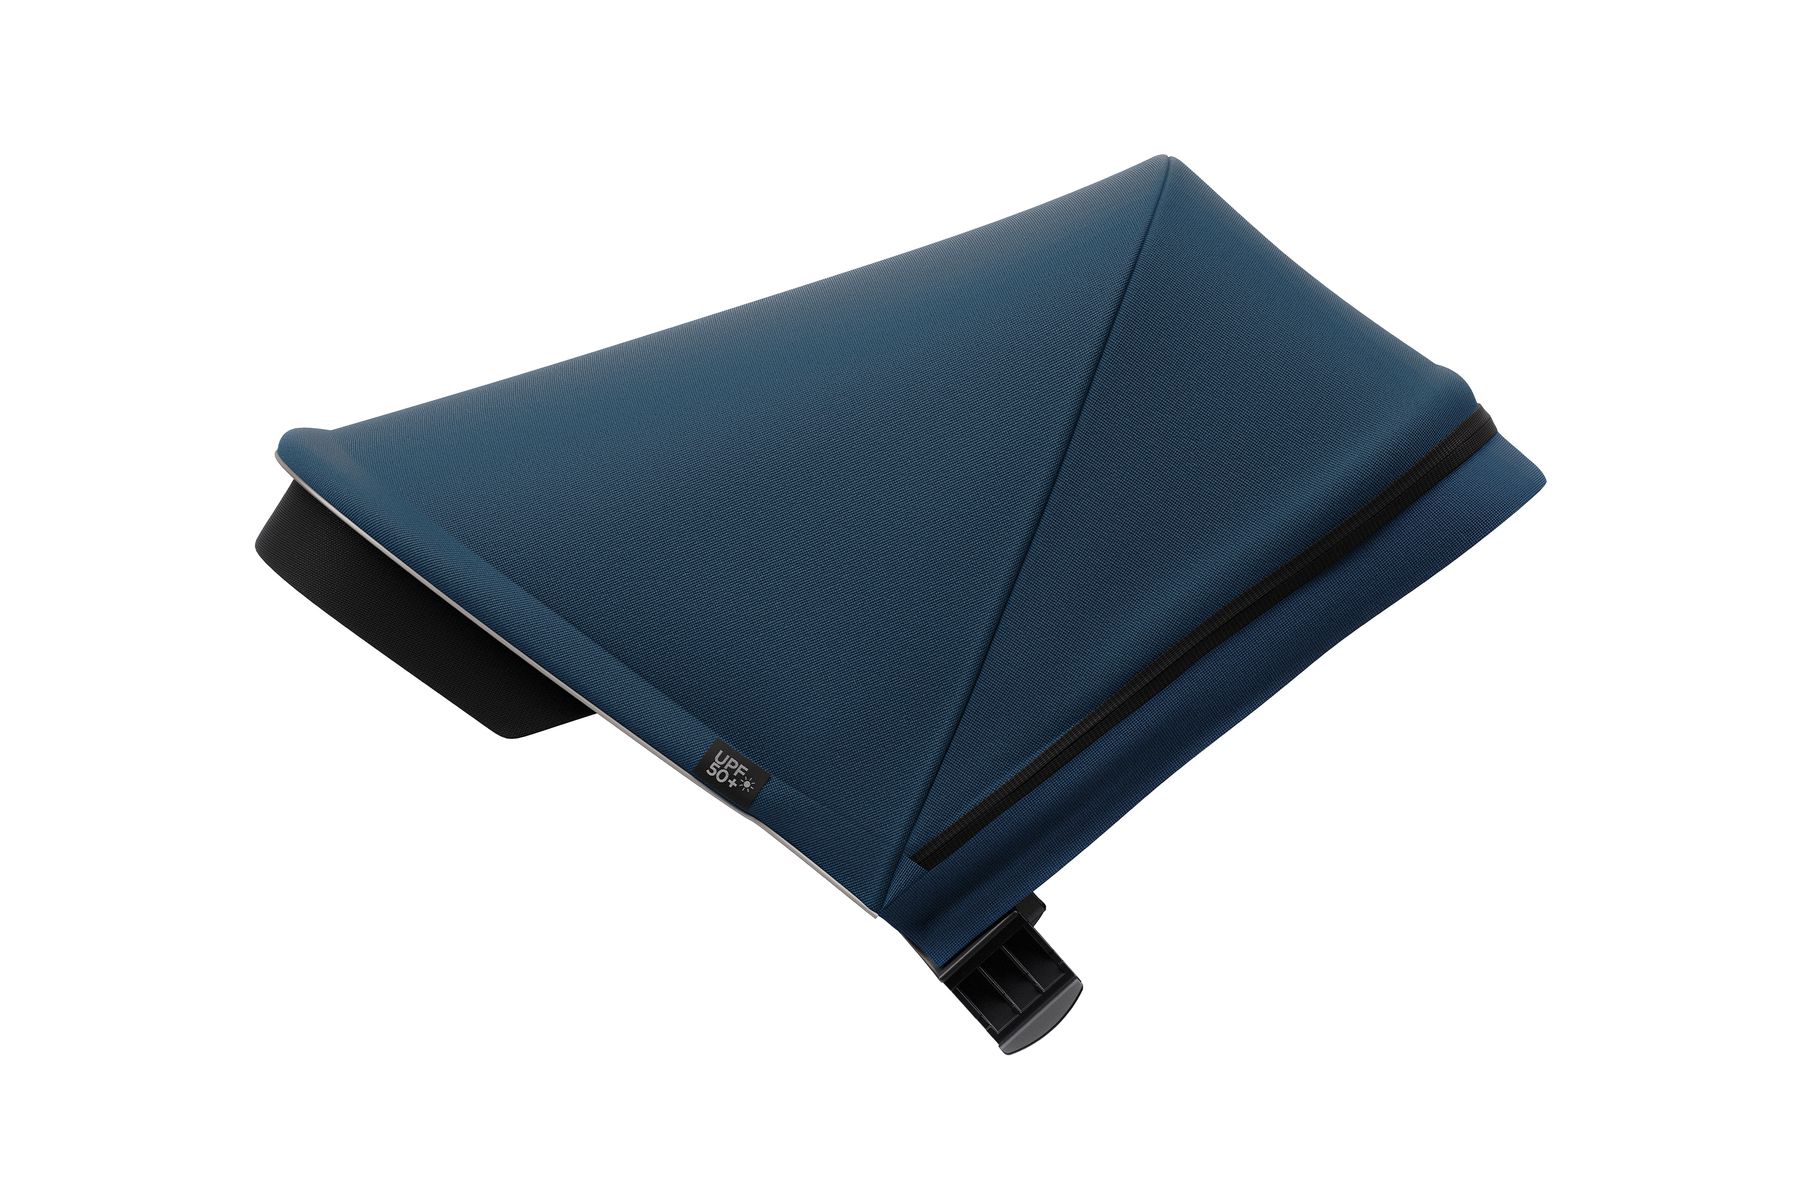 Thule Spring Canopy Side view Majolica Blue